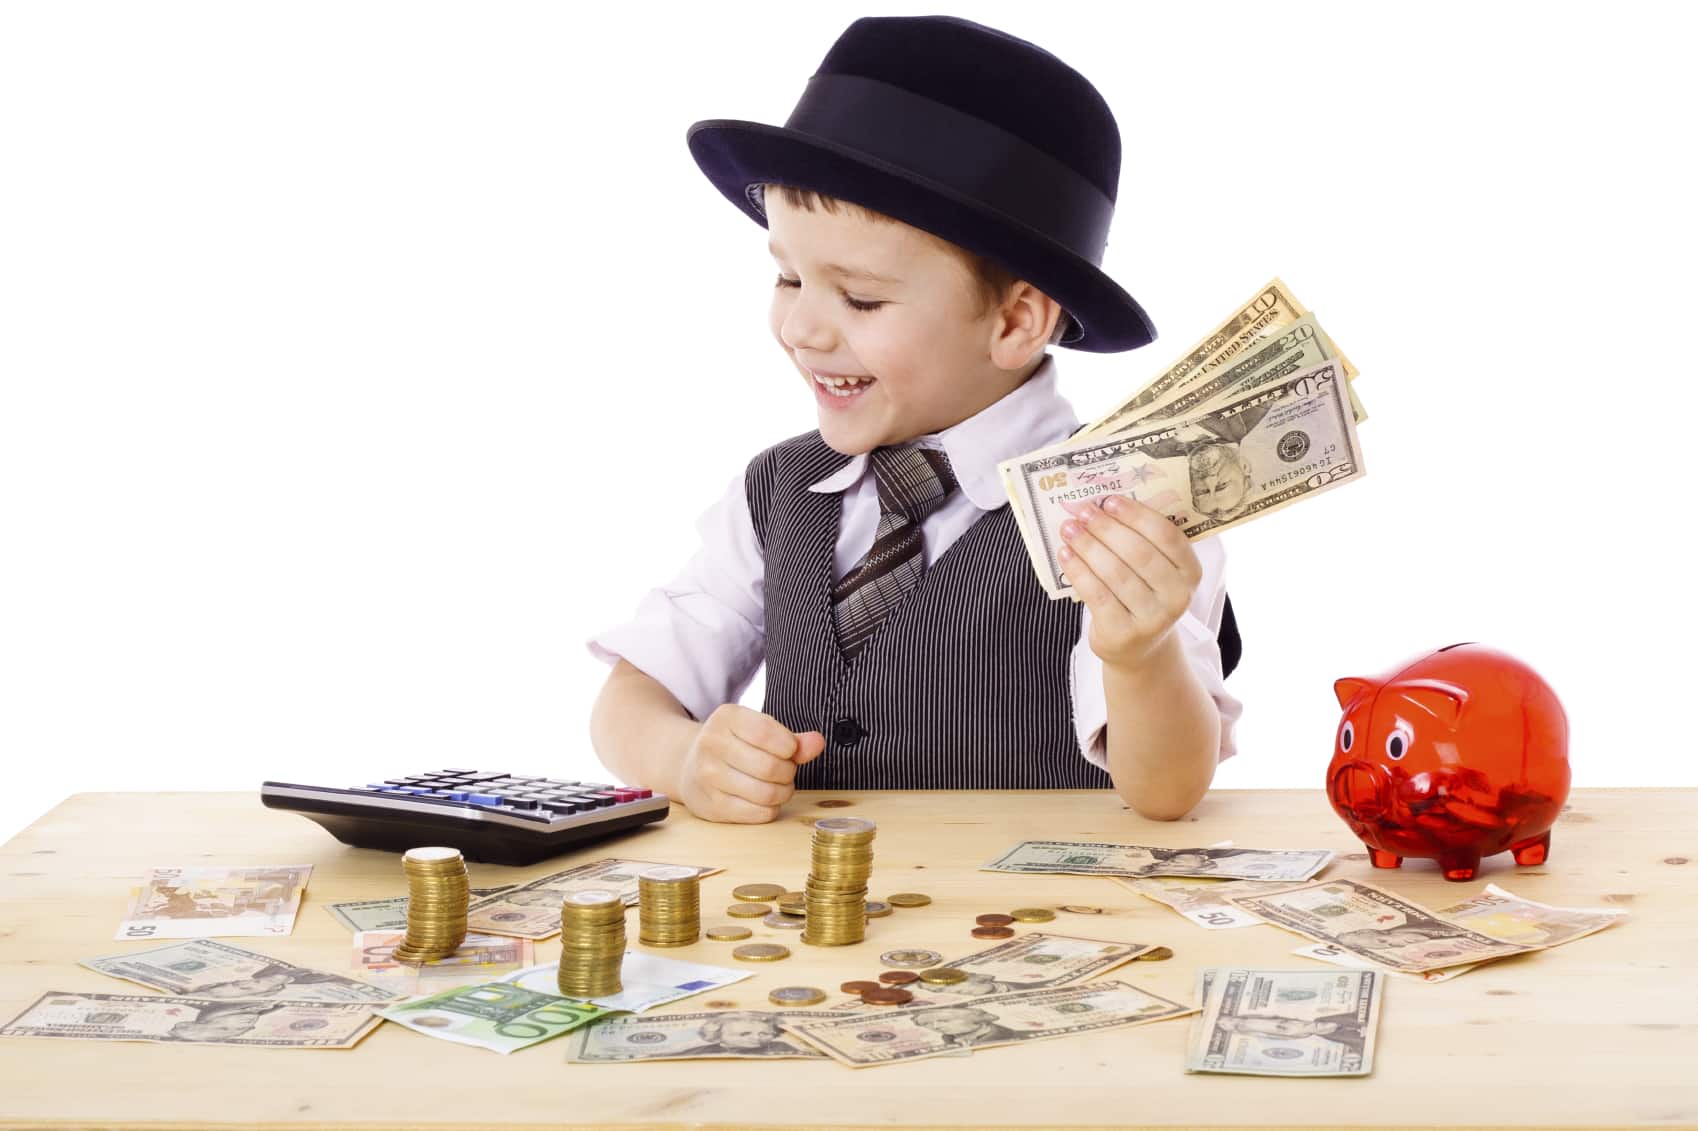 How can you give your kids money smarts?